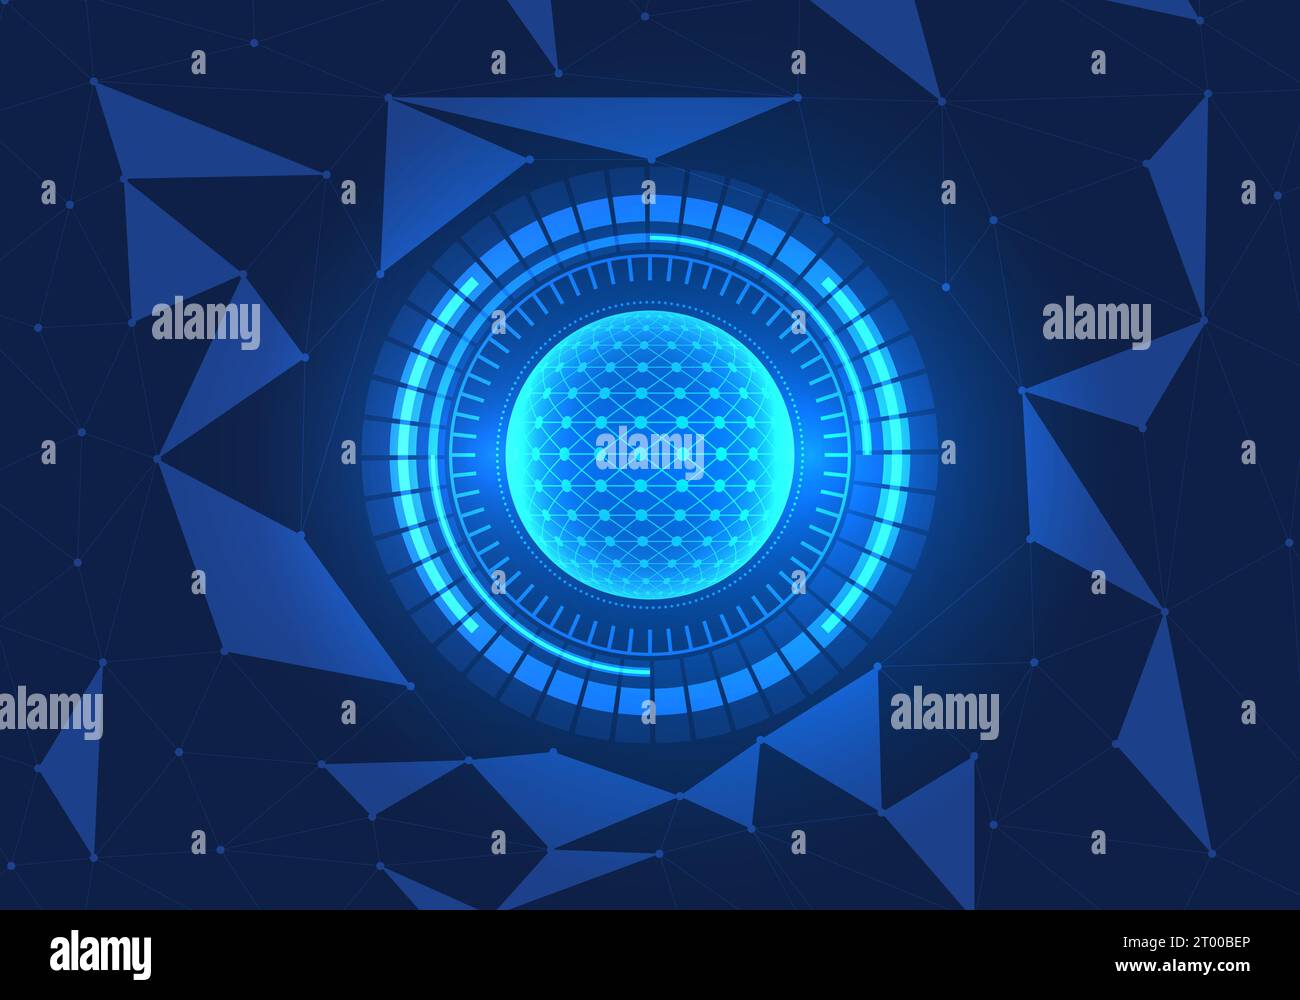 Technology circle and the side area of geometric shapes are arranged next to each other. Represents the technology at the center of the cyber world. t Stock Vector